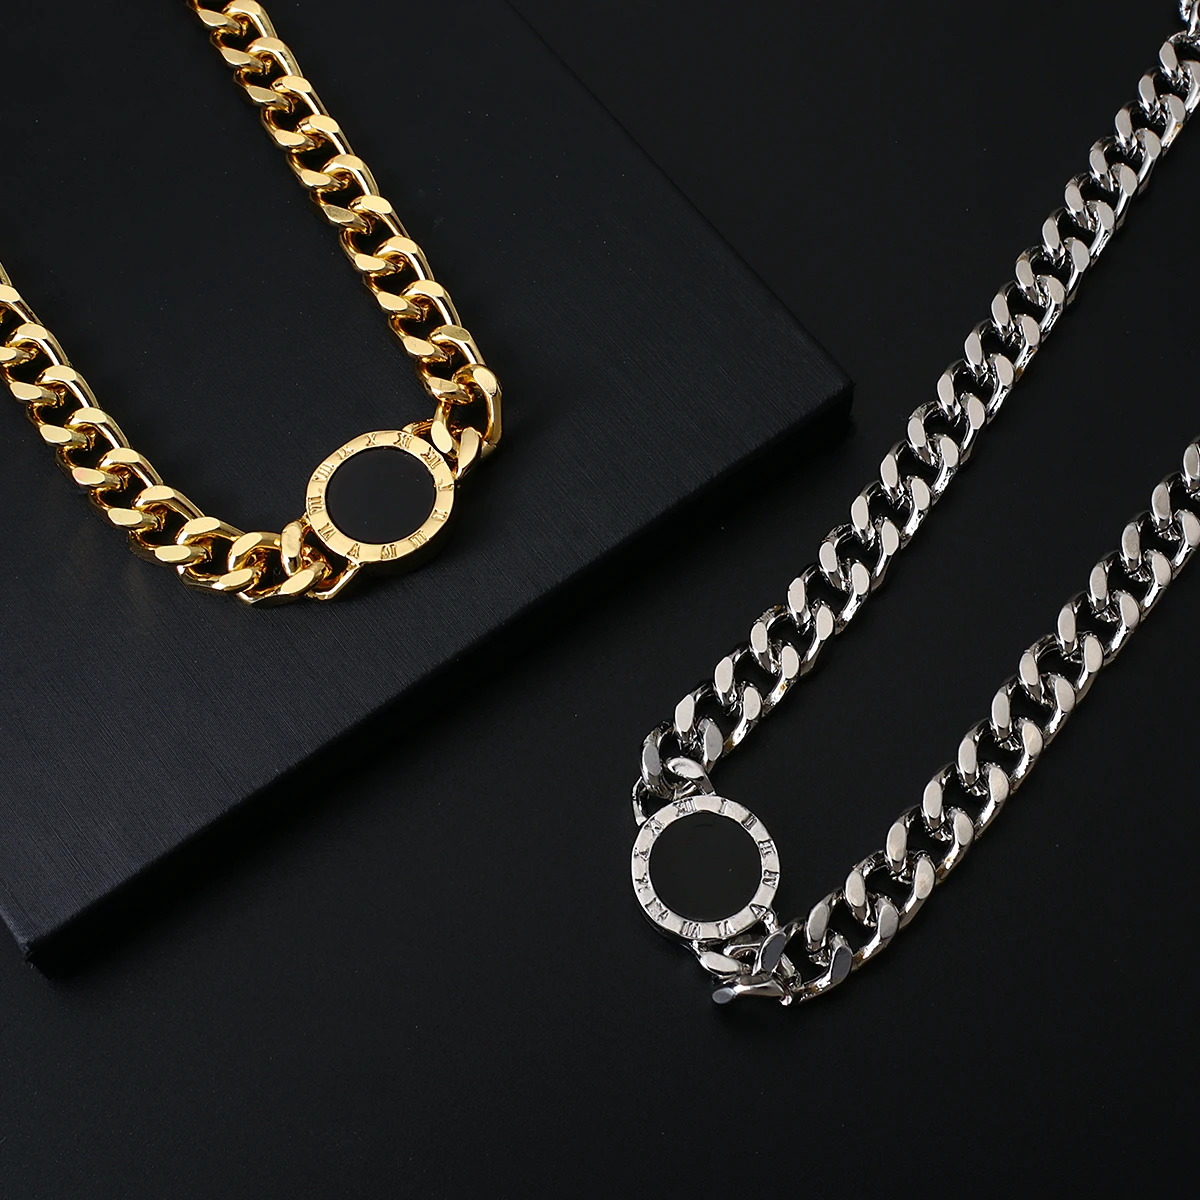 Flashbuy Trendy Roman Numerals Black Round Necklace Women Men Gold Silver Color Thick Chain Statement Necklaces Collares Jewelry